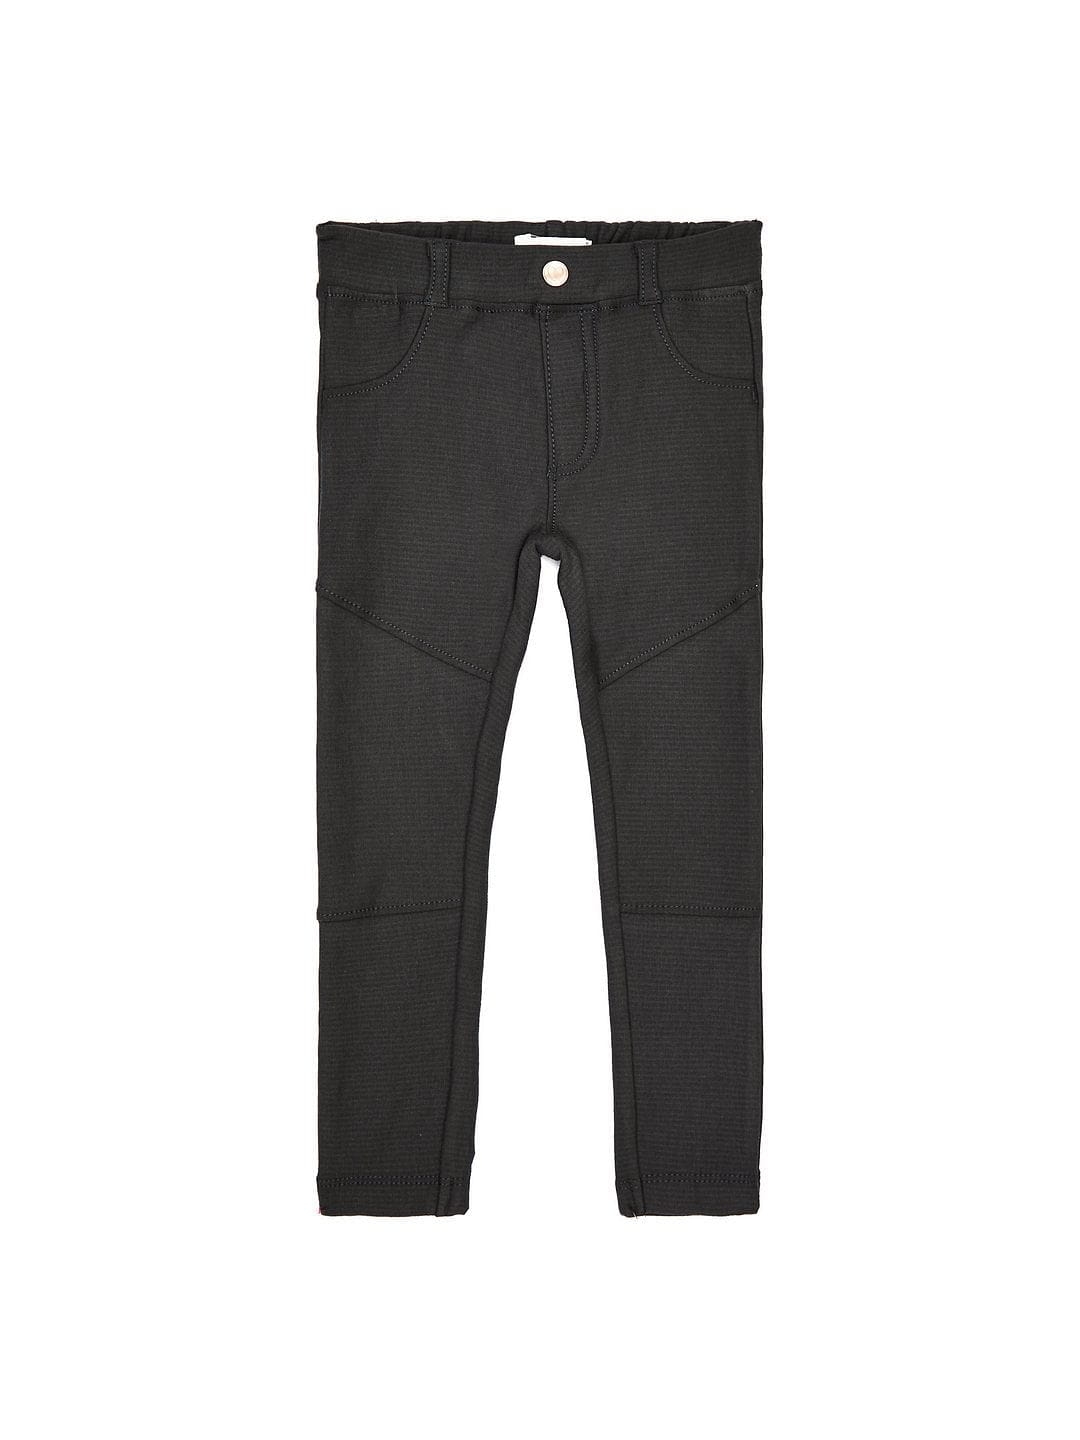 Mothercare | Charcoal Grey Jeggings 0